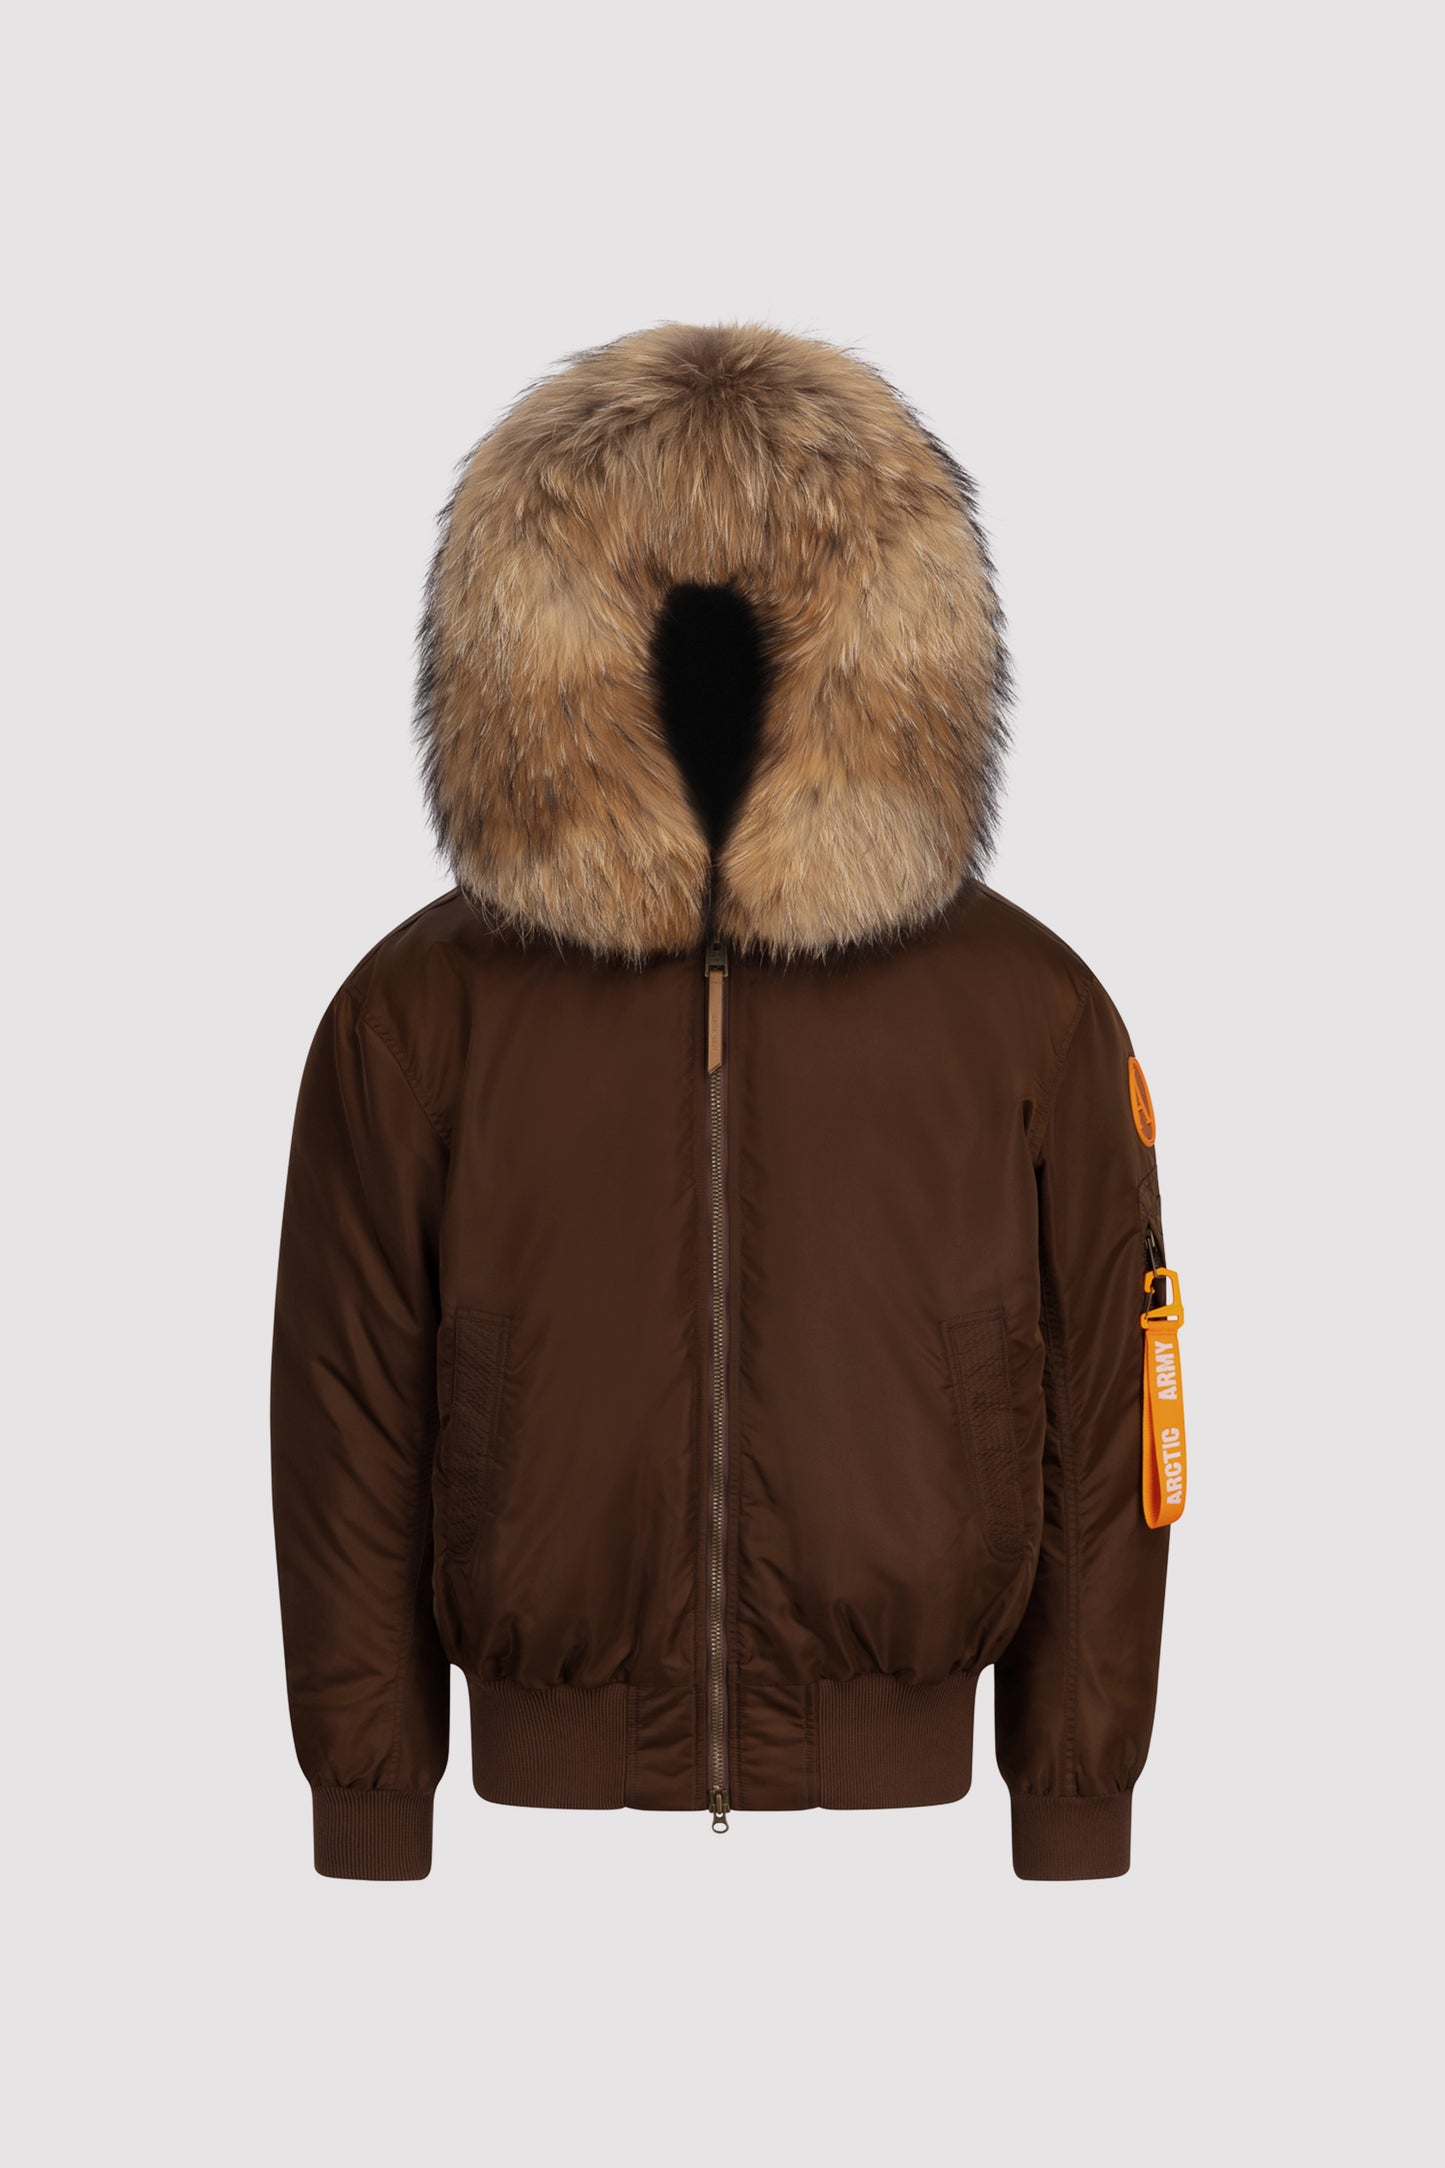 Women's Bomber with Fur in Chocolate